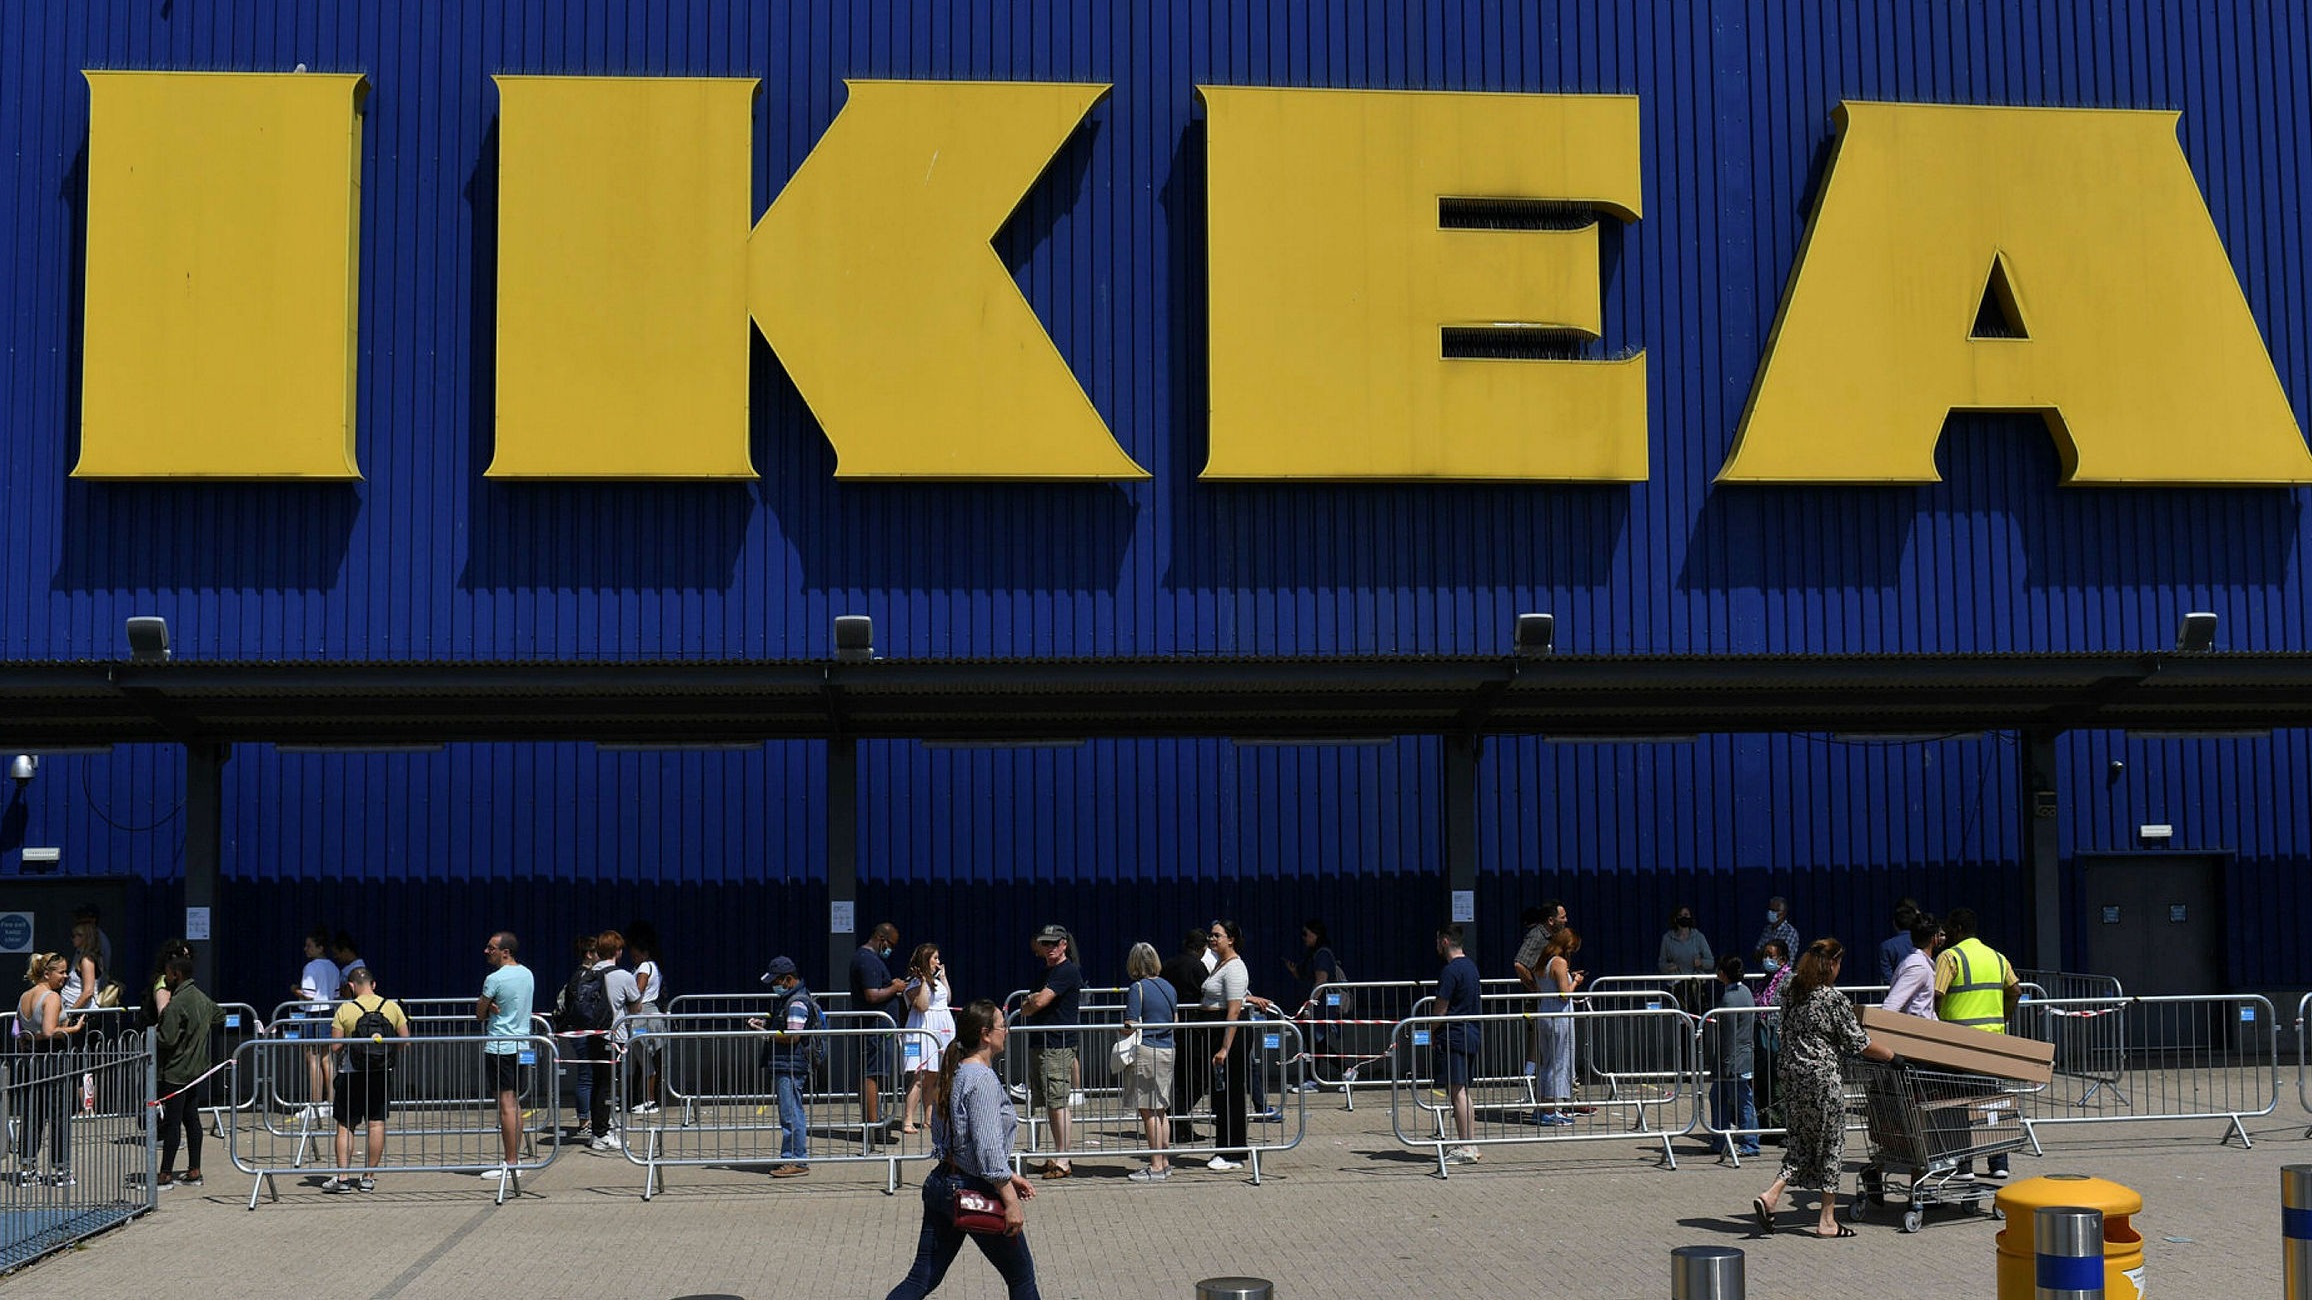 Ikea to record number of stores this year despite online | Financial Times